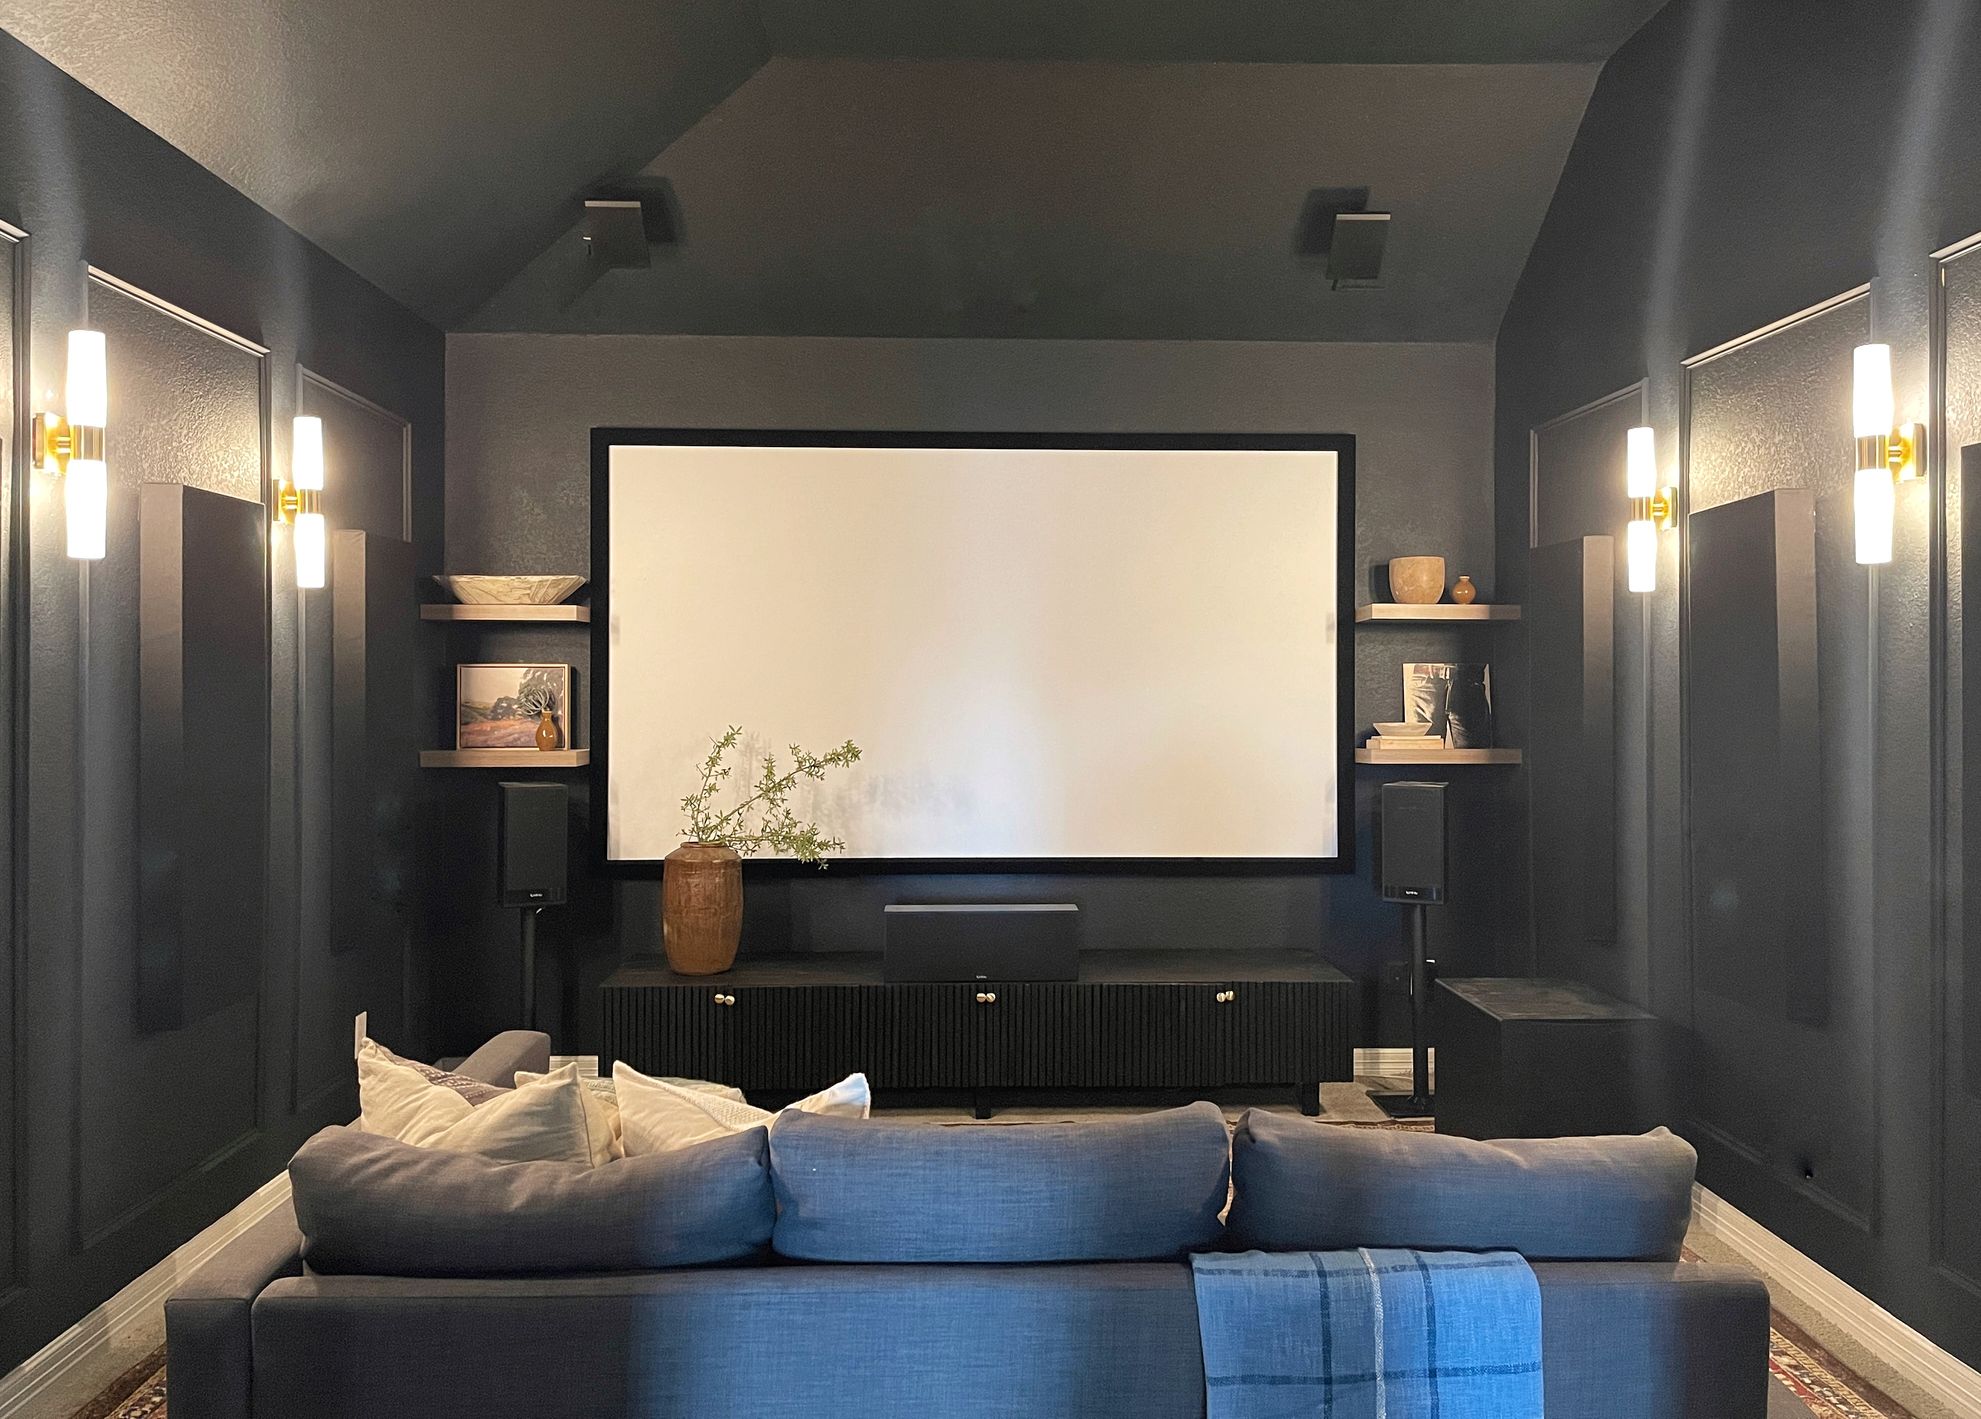 Media Room Makeover With Budget